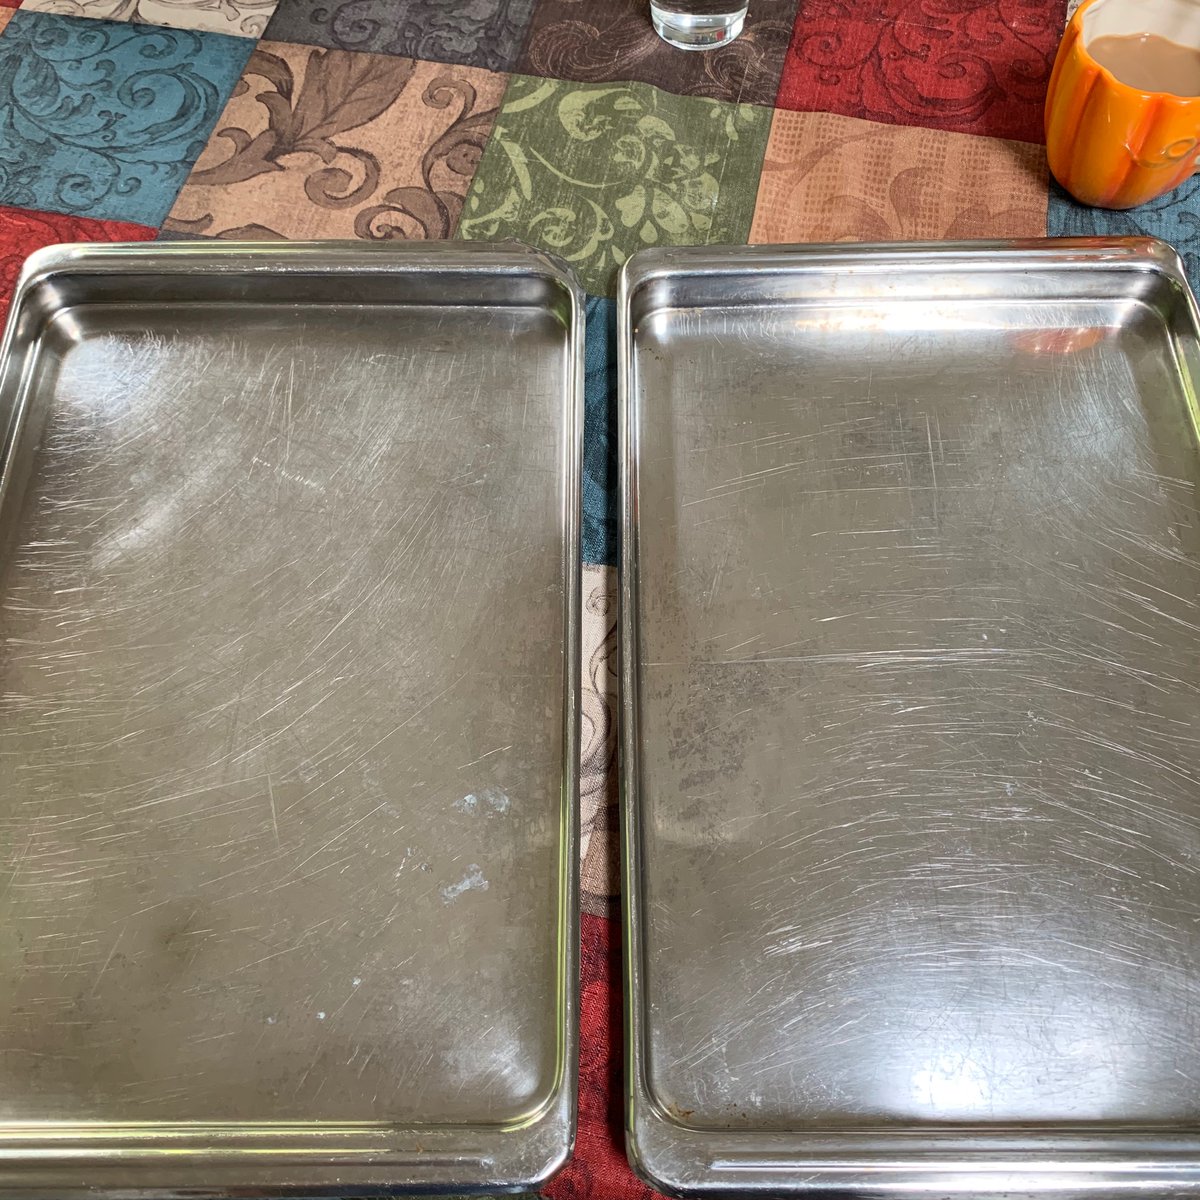 I just washed these pans past night.  17/